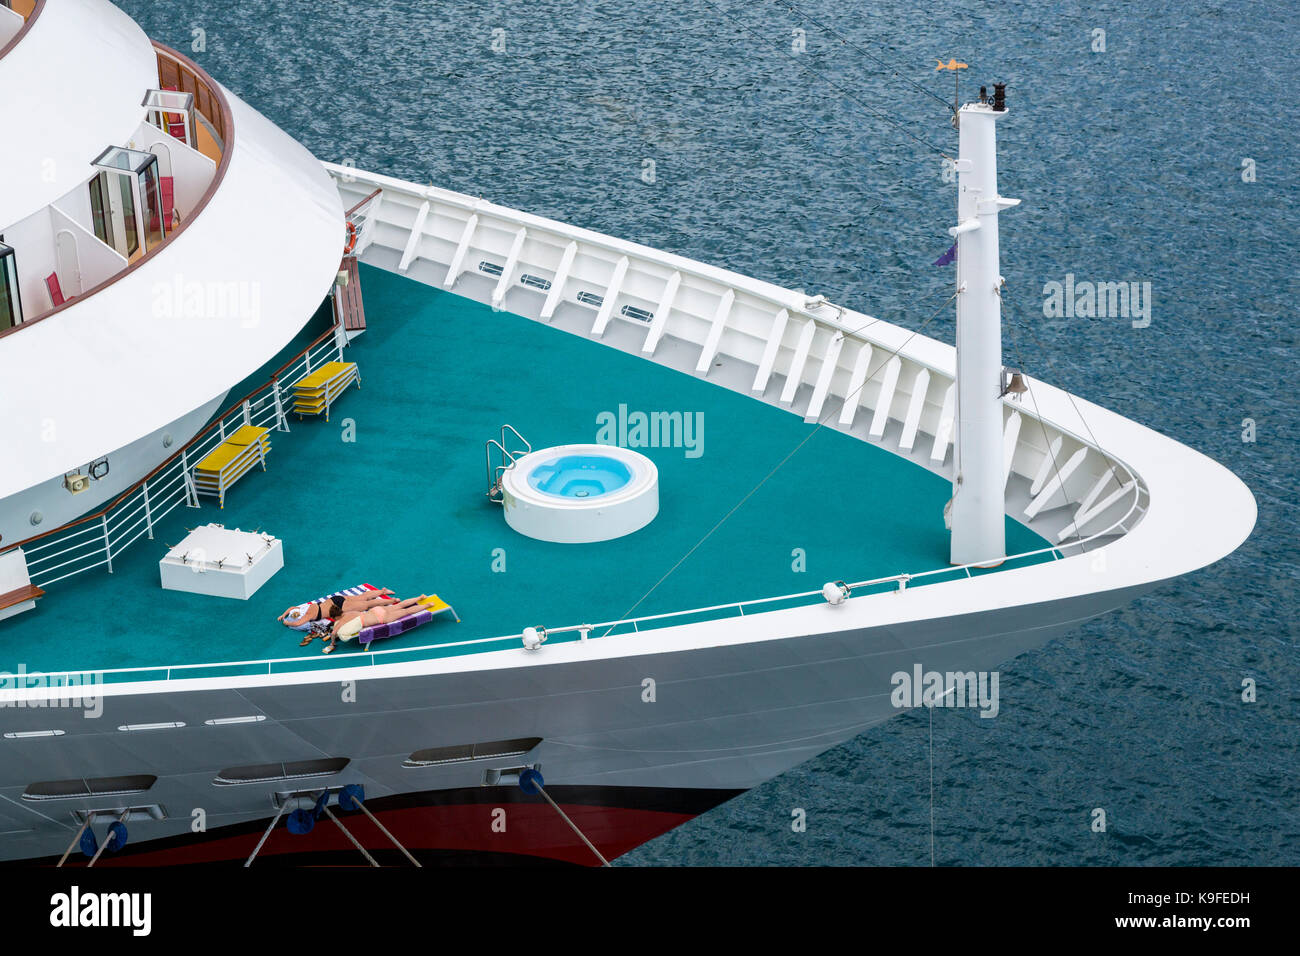 Sunbathers on Deck of  a Cruise Ship. Stock Photo